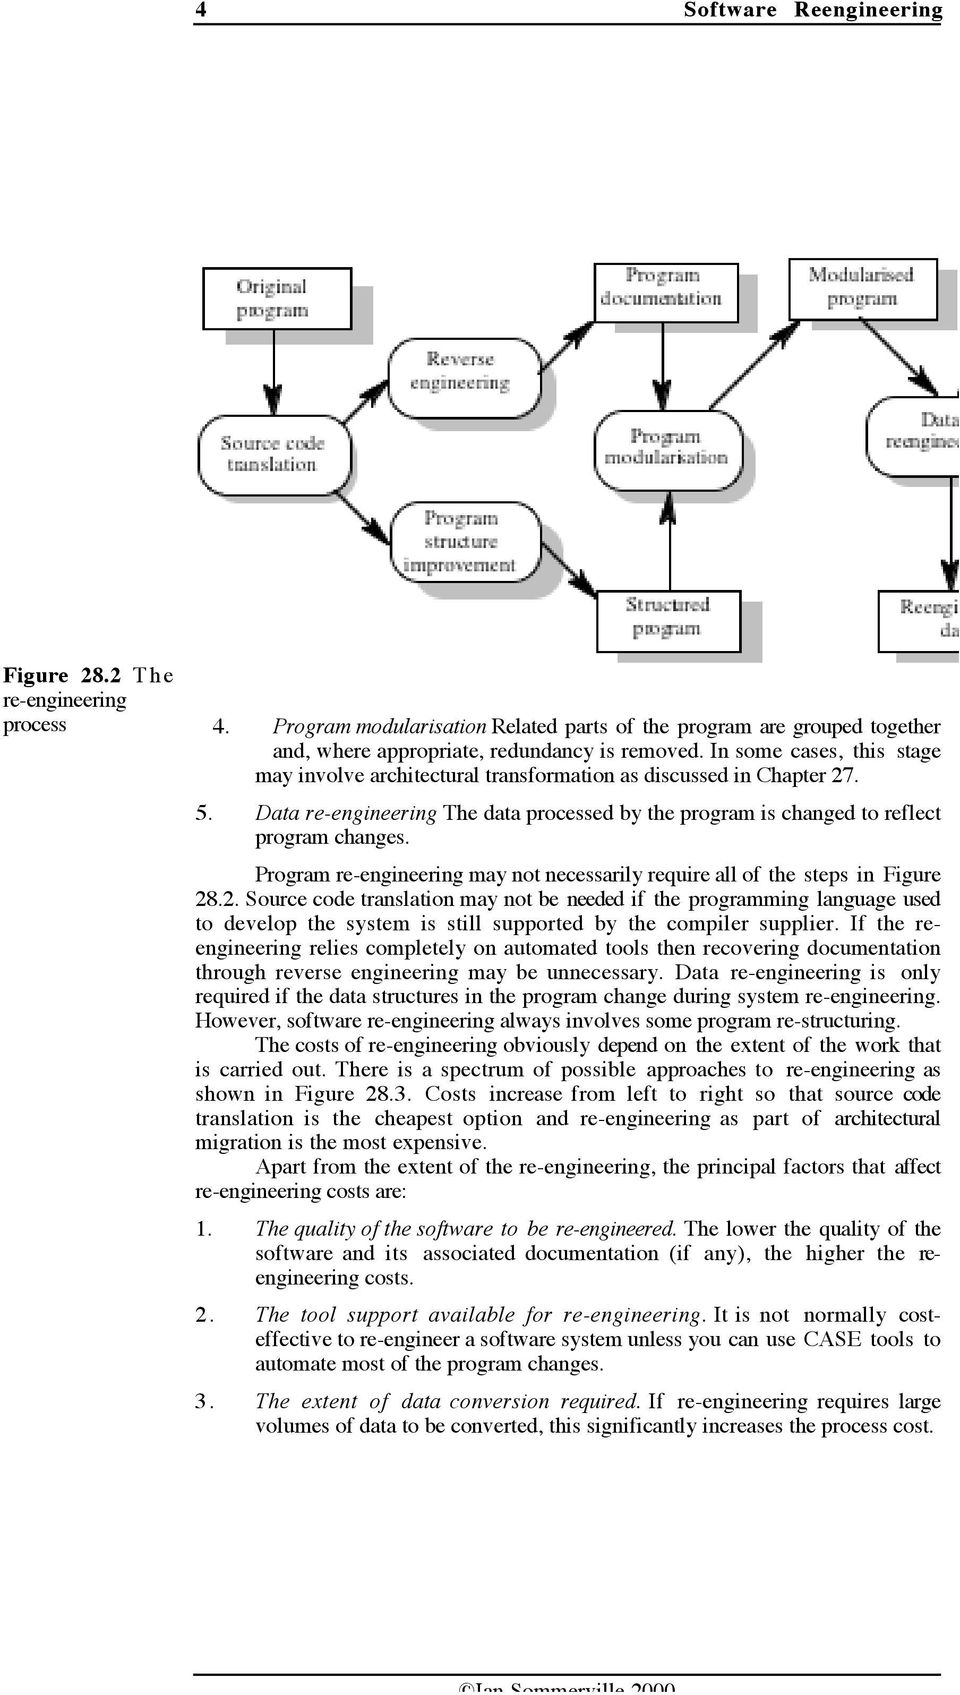 Program re-engineering may not necessarily require all of the steps in Figure 28